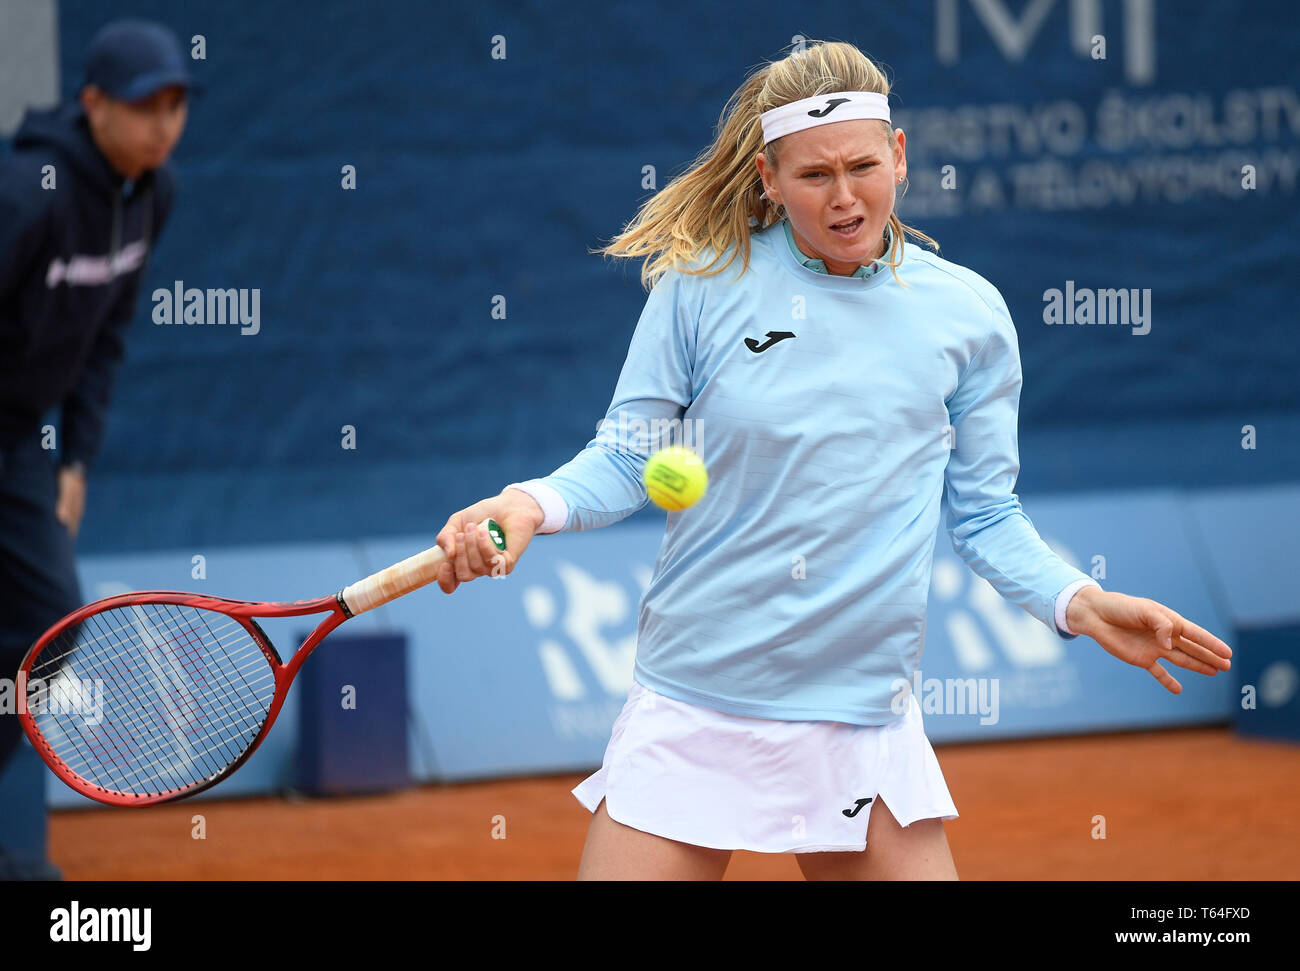 Prague, Czech Republic. 28th Apr, 2019. Tennis player Marie Bouzkova  (Czech) in action during a qualifying match against Raluca Serban (Cyprus)  within the J&T Banka Prague Open, on April 28, 2019, in